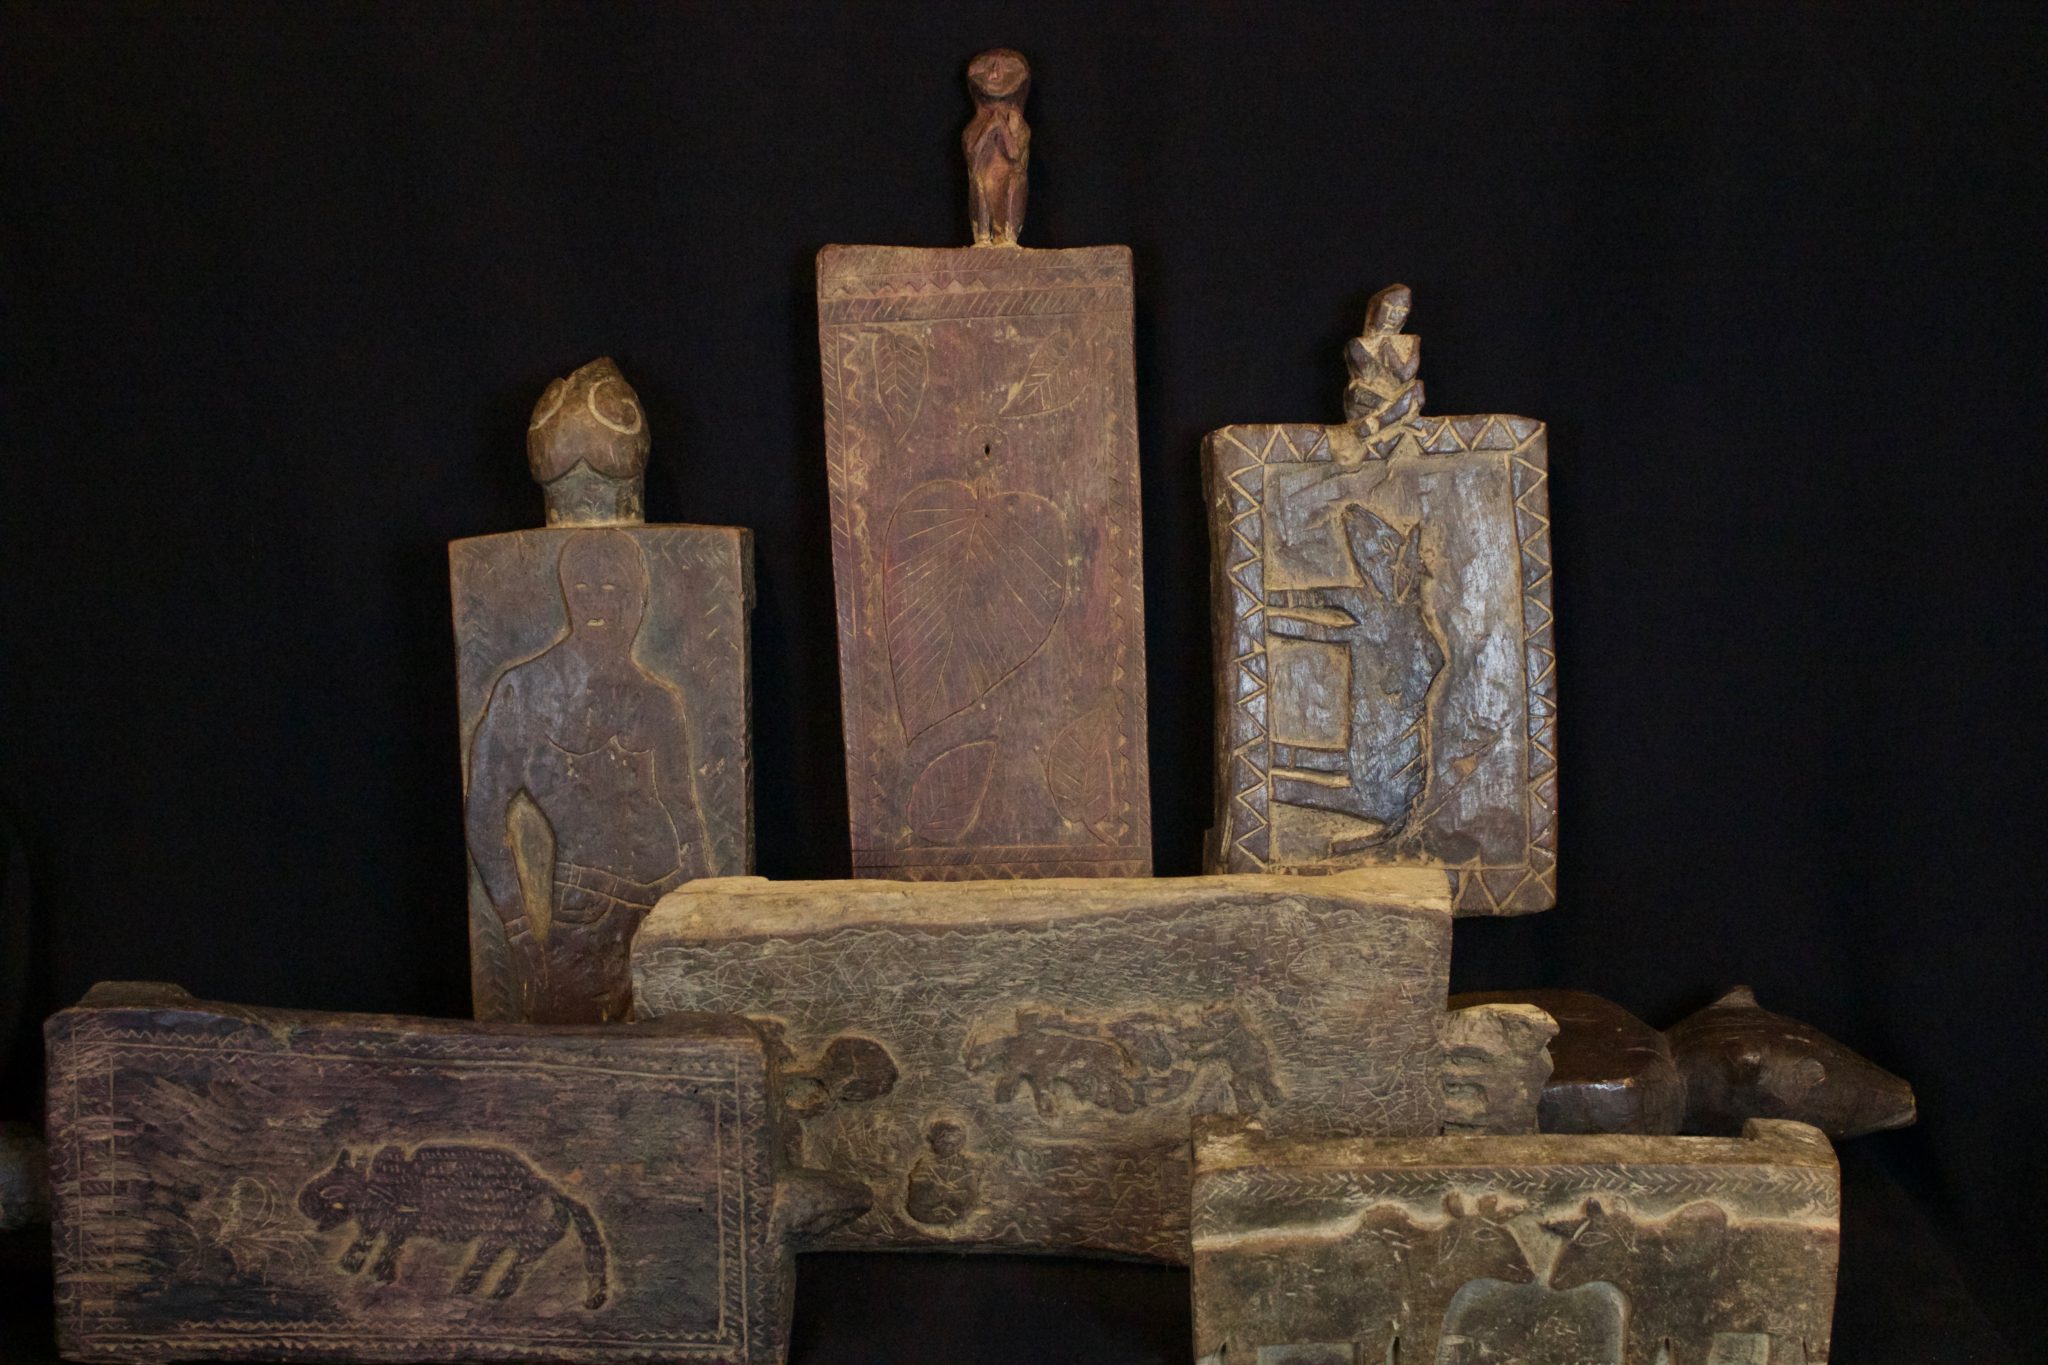 Hand Carved Wooden Ceremonial Shaman Stools, from the late 19th to mid 20th century, Wood, Used for meditation and for ritual ceremonies. 12" to 14", $185. to $320.